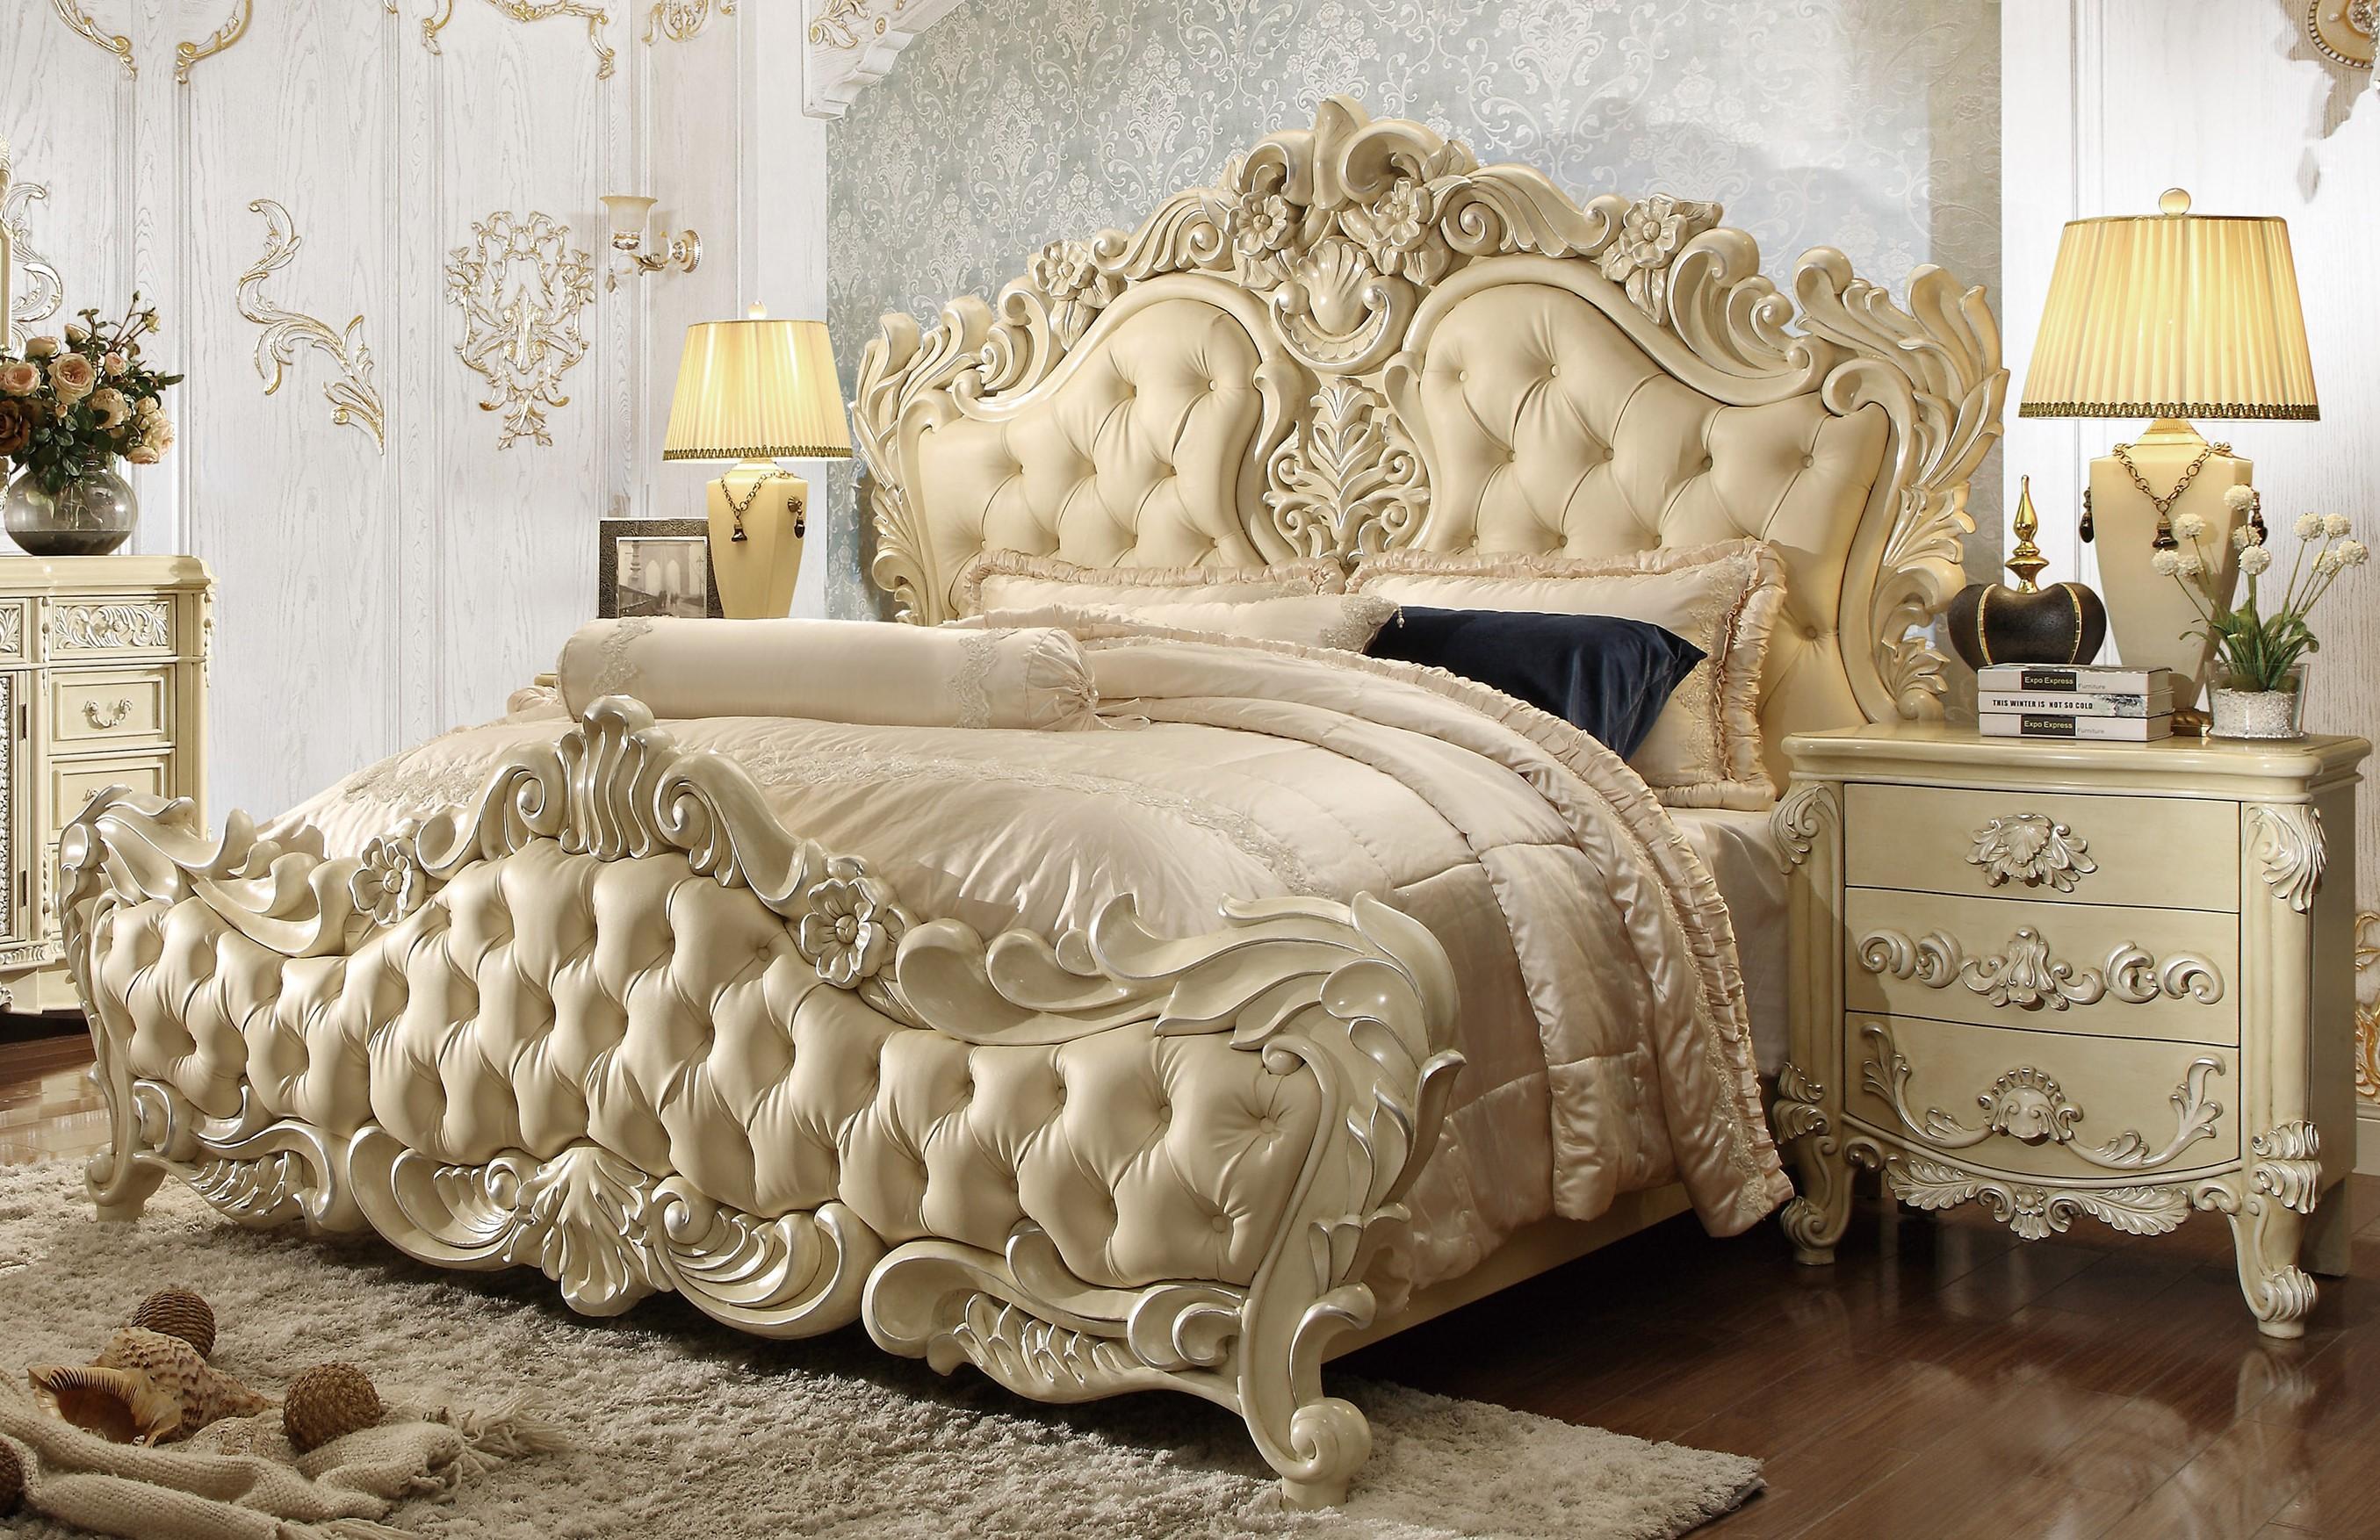 

    
Luxury Cream Cal King Bedroom 3Pcs Carved Wood Traditional Homey Design HD-5800
